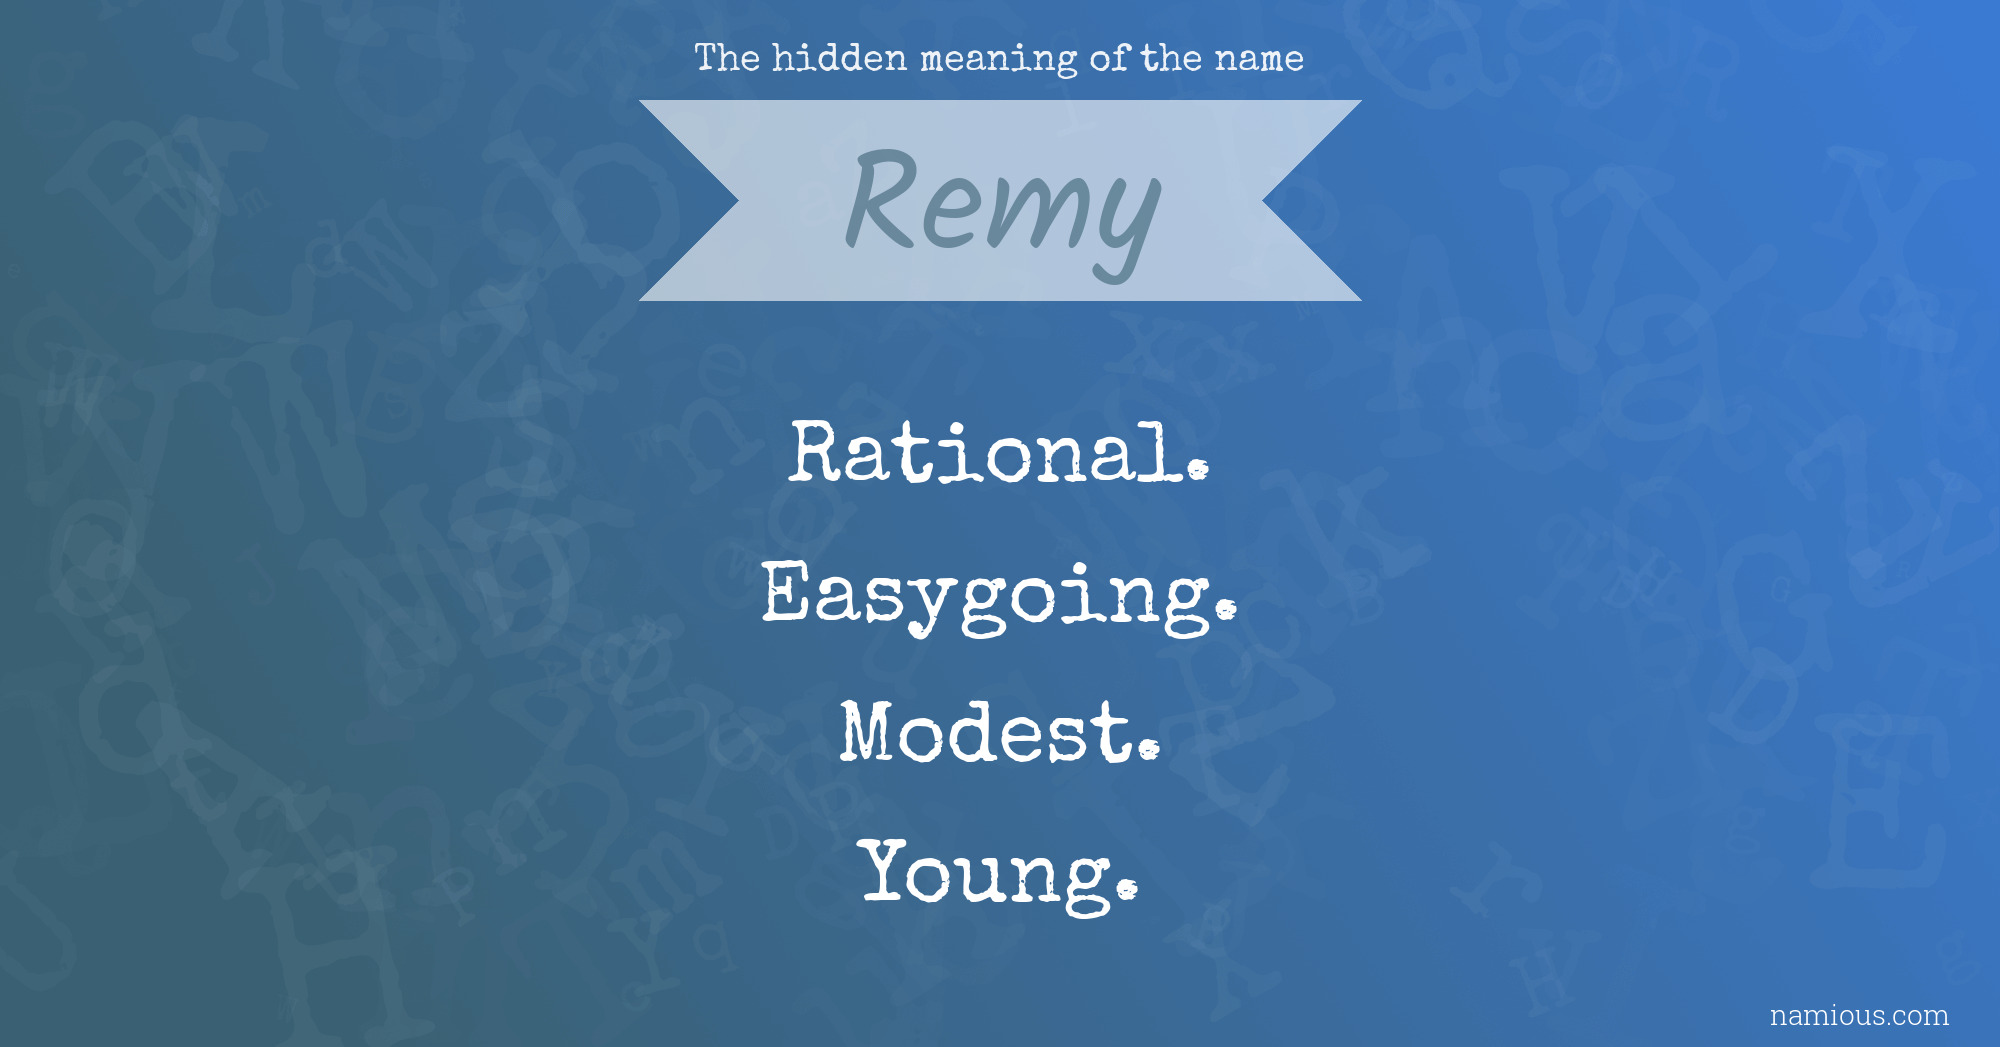 The hidden meaning of the name Remy